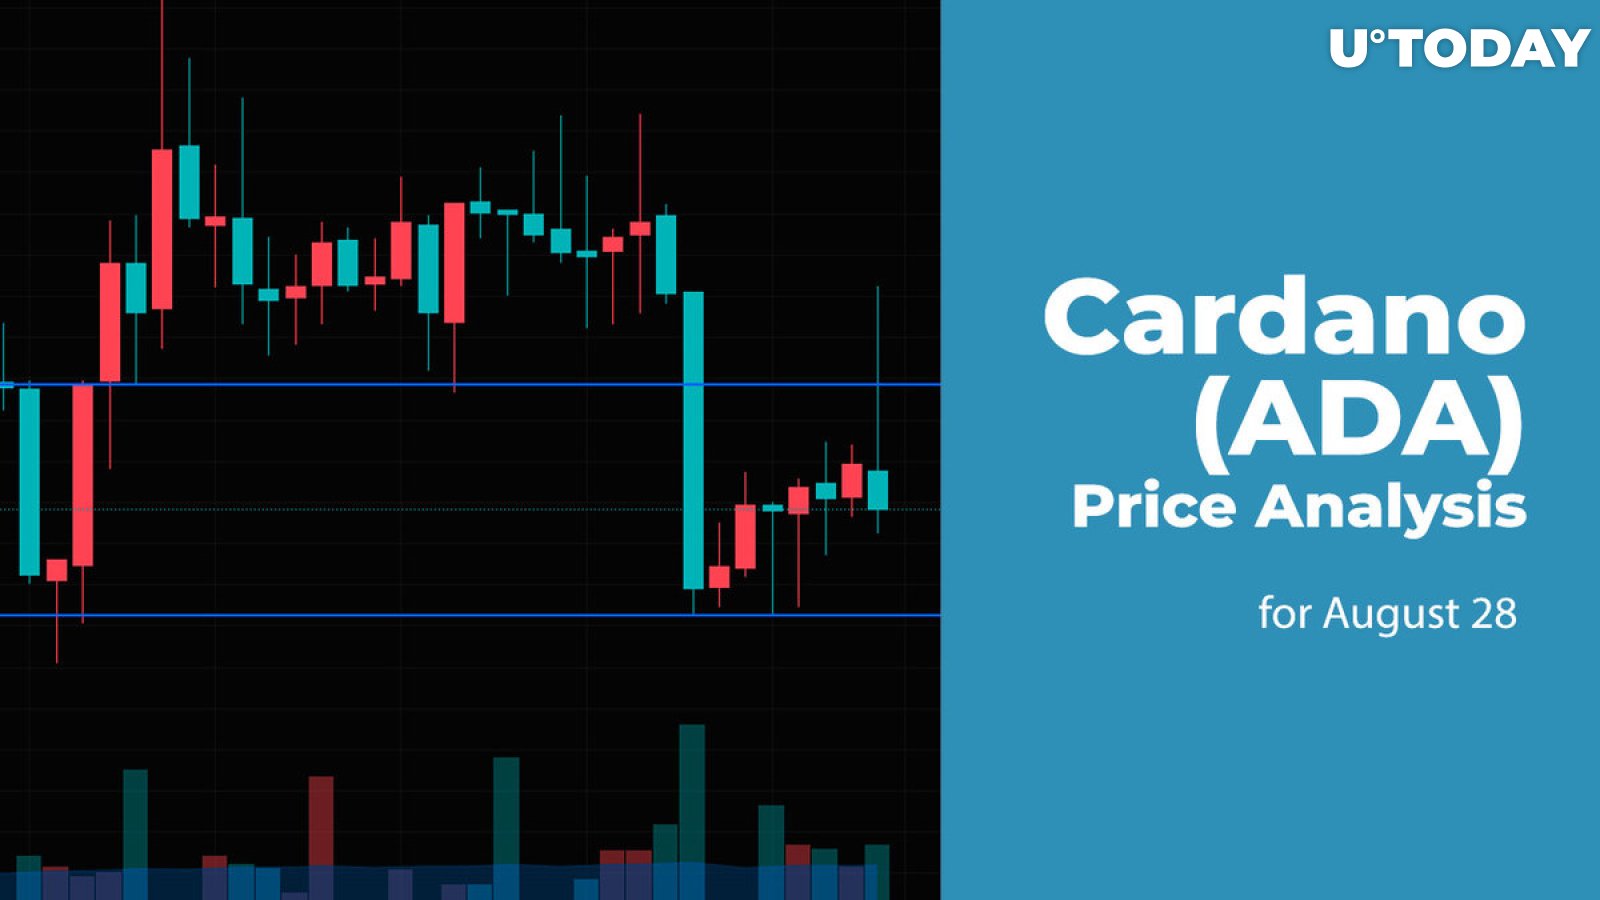 Cardano (ADA) Price Analysis for August 28